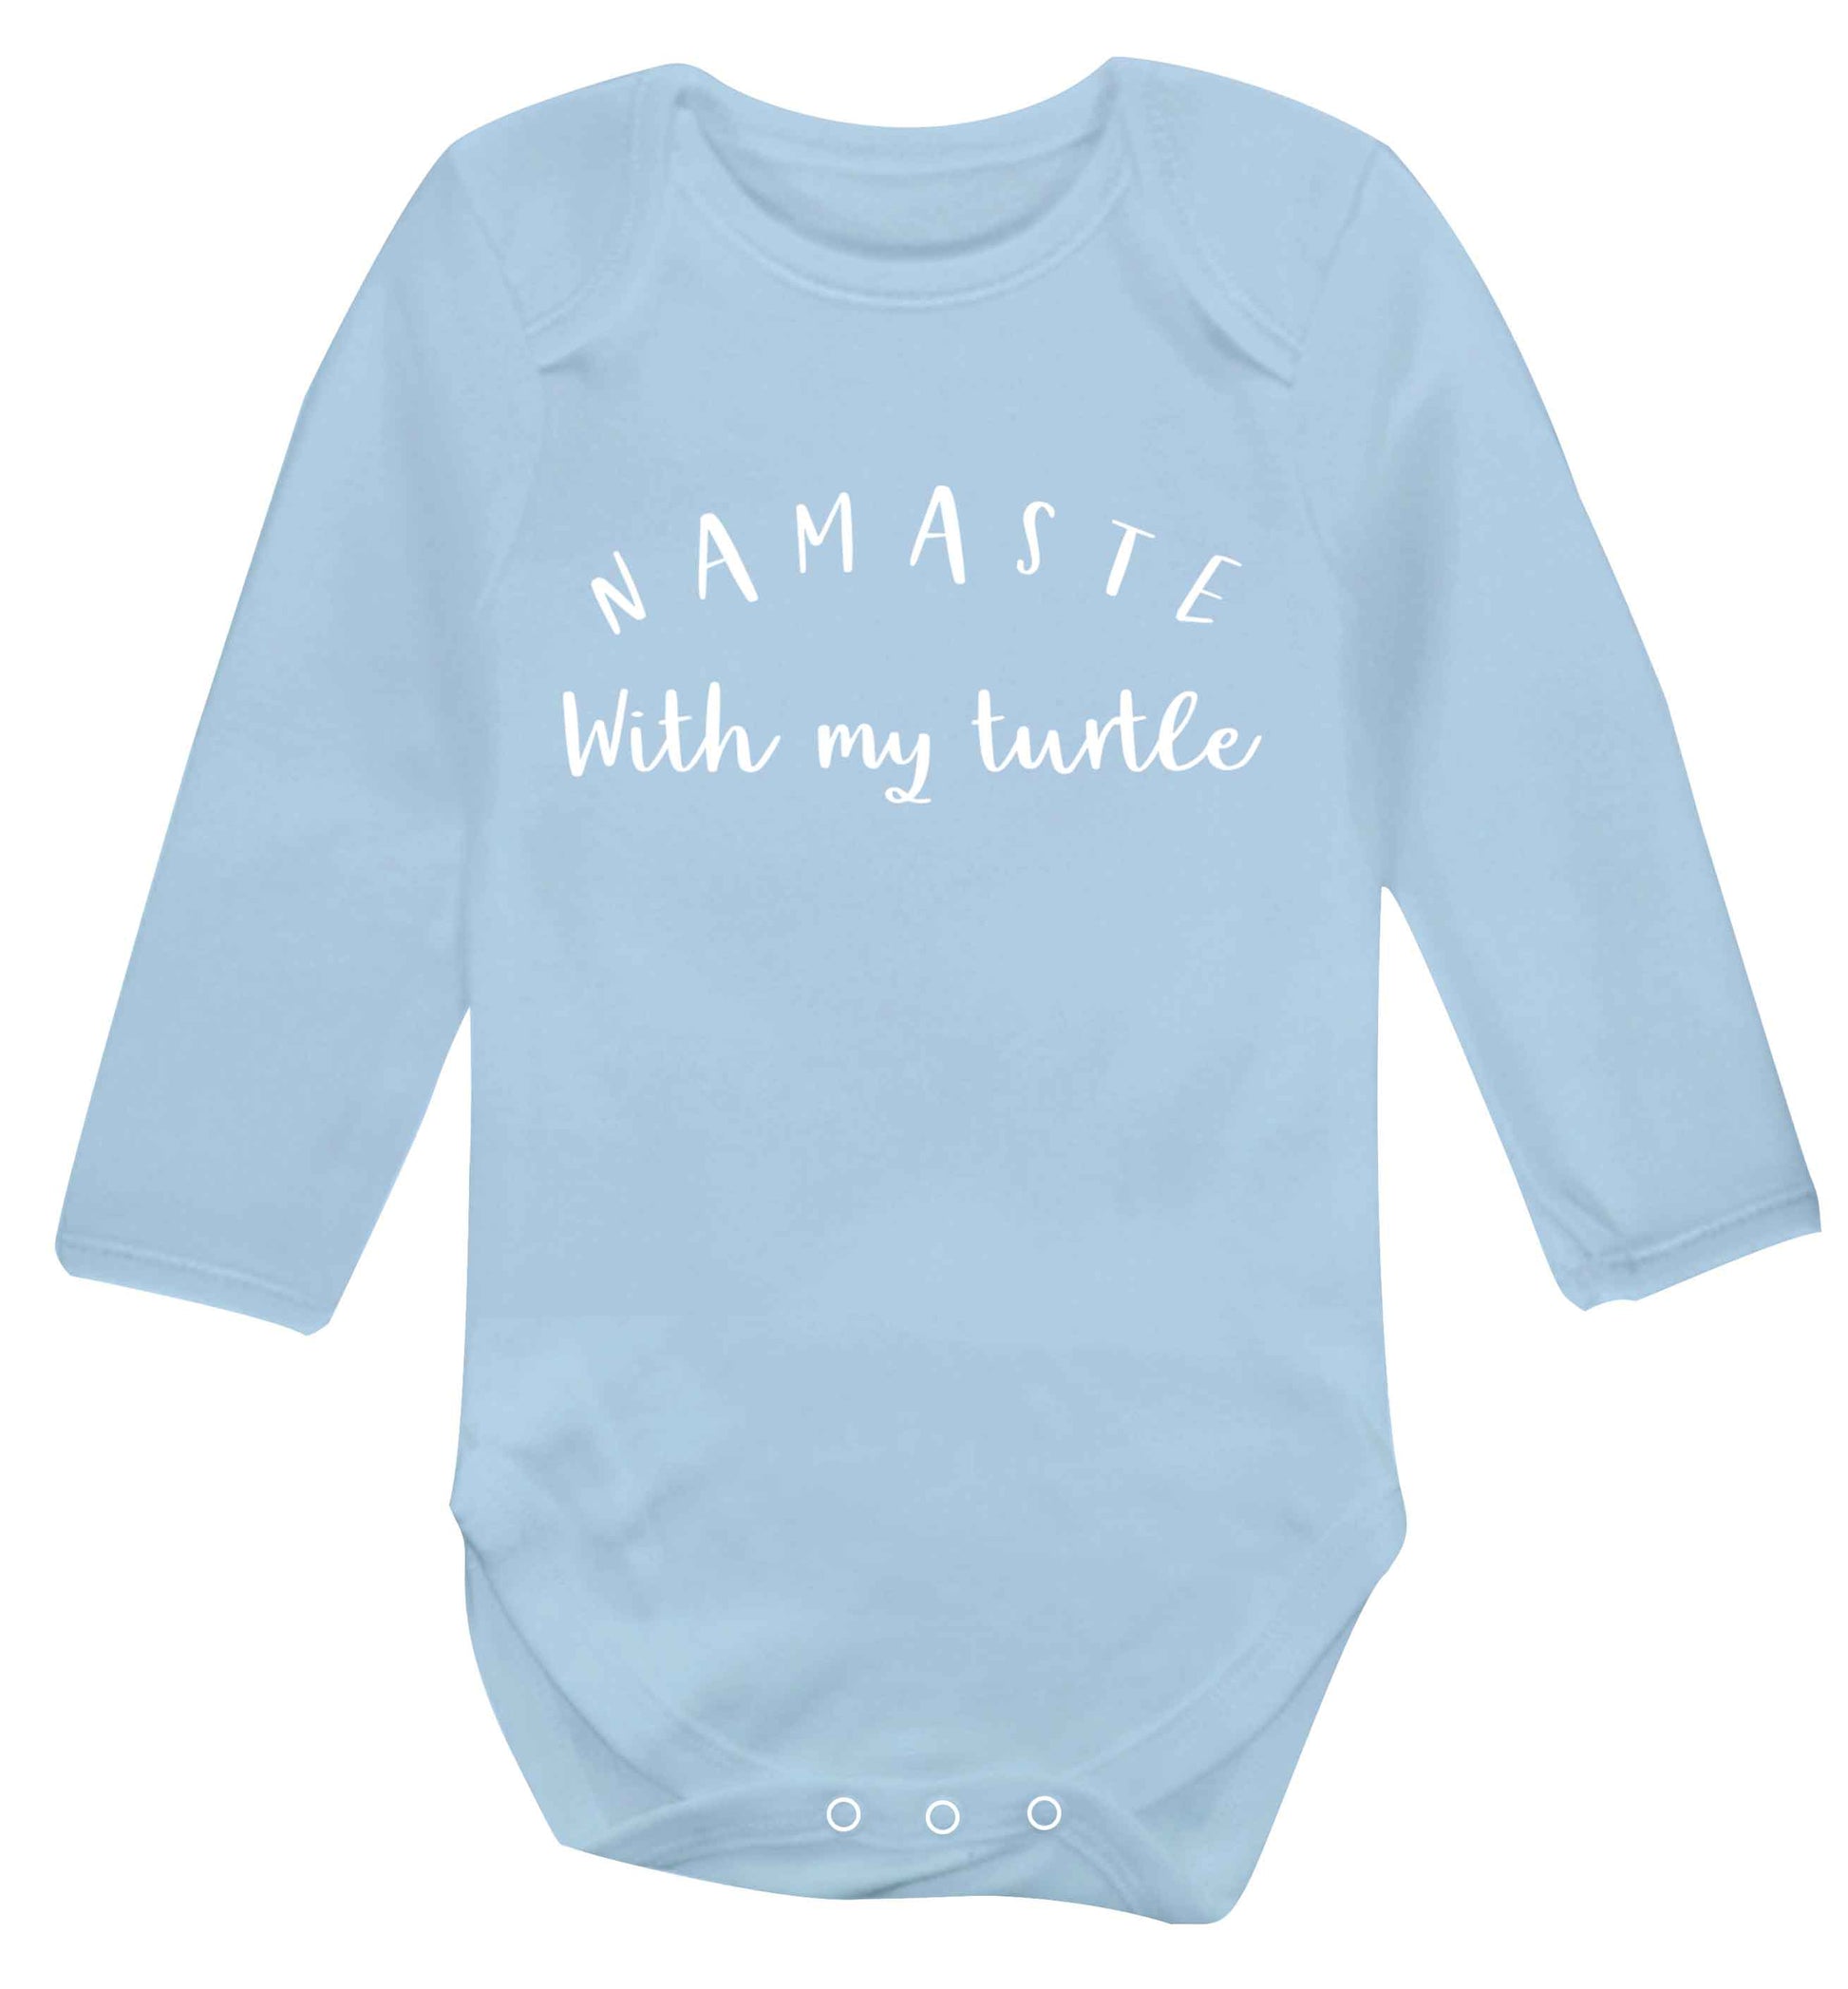 Namaste with my turtle Baby Vest long sleeved pale blue 6-12 months